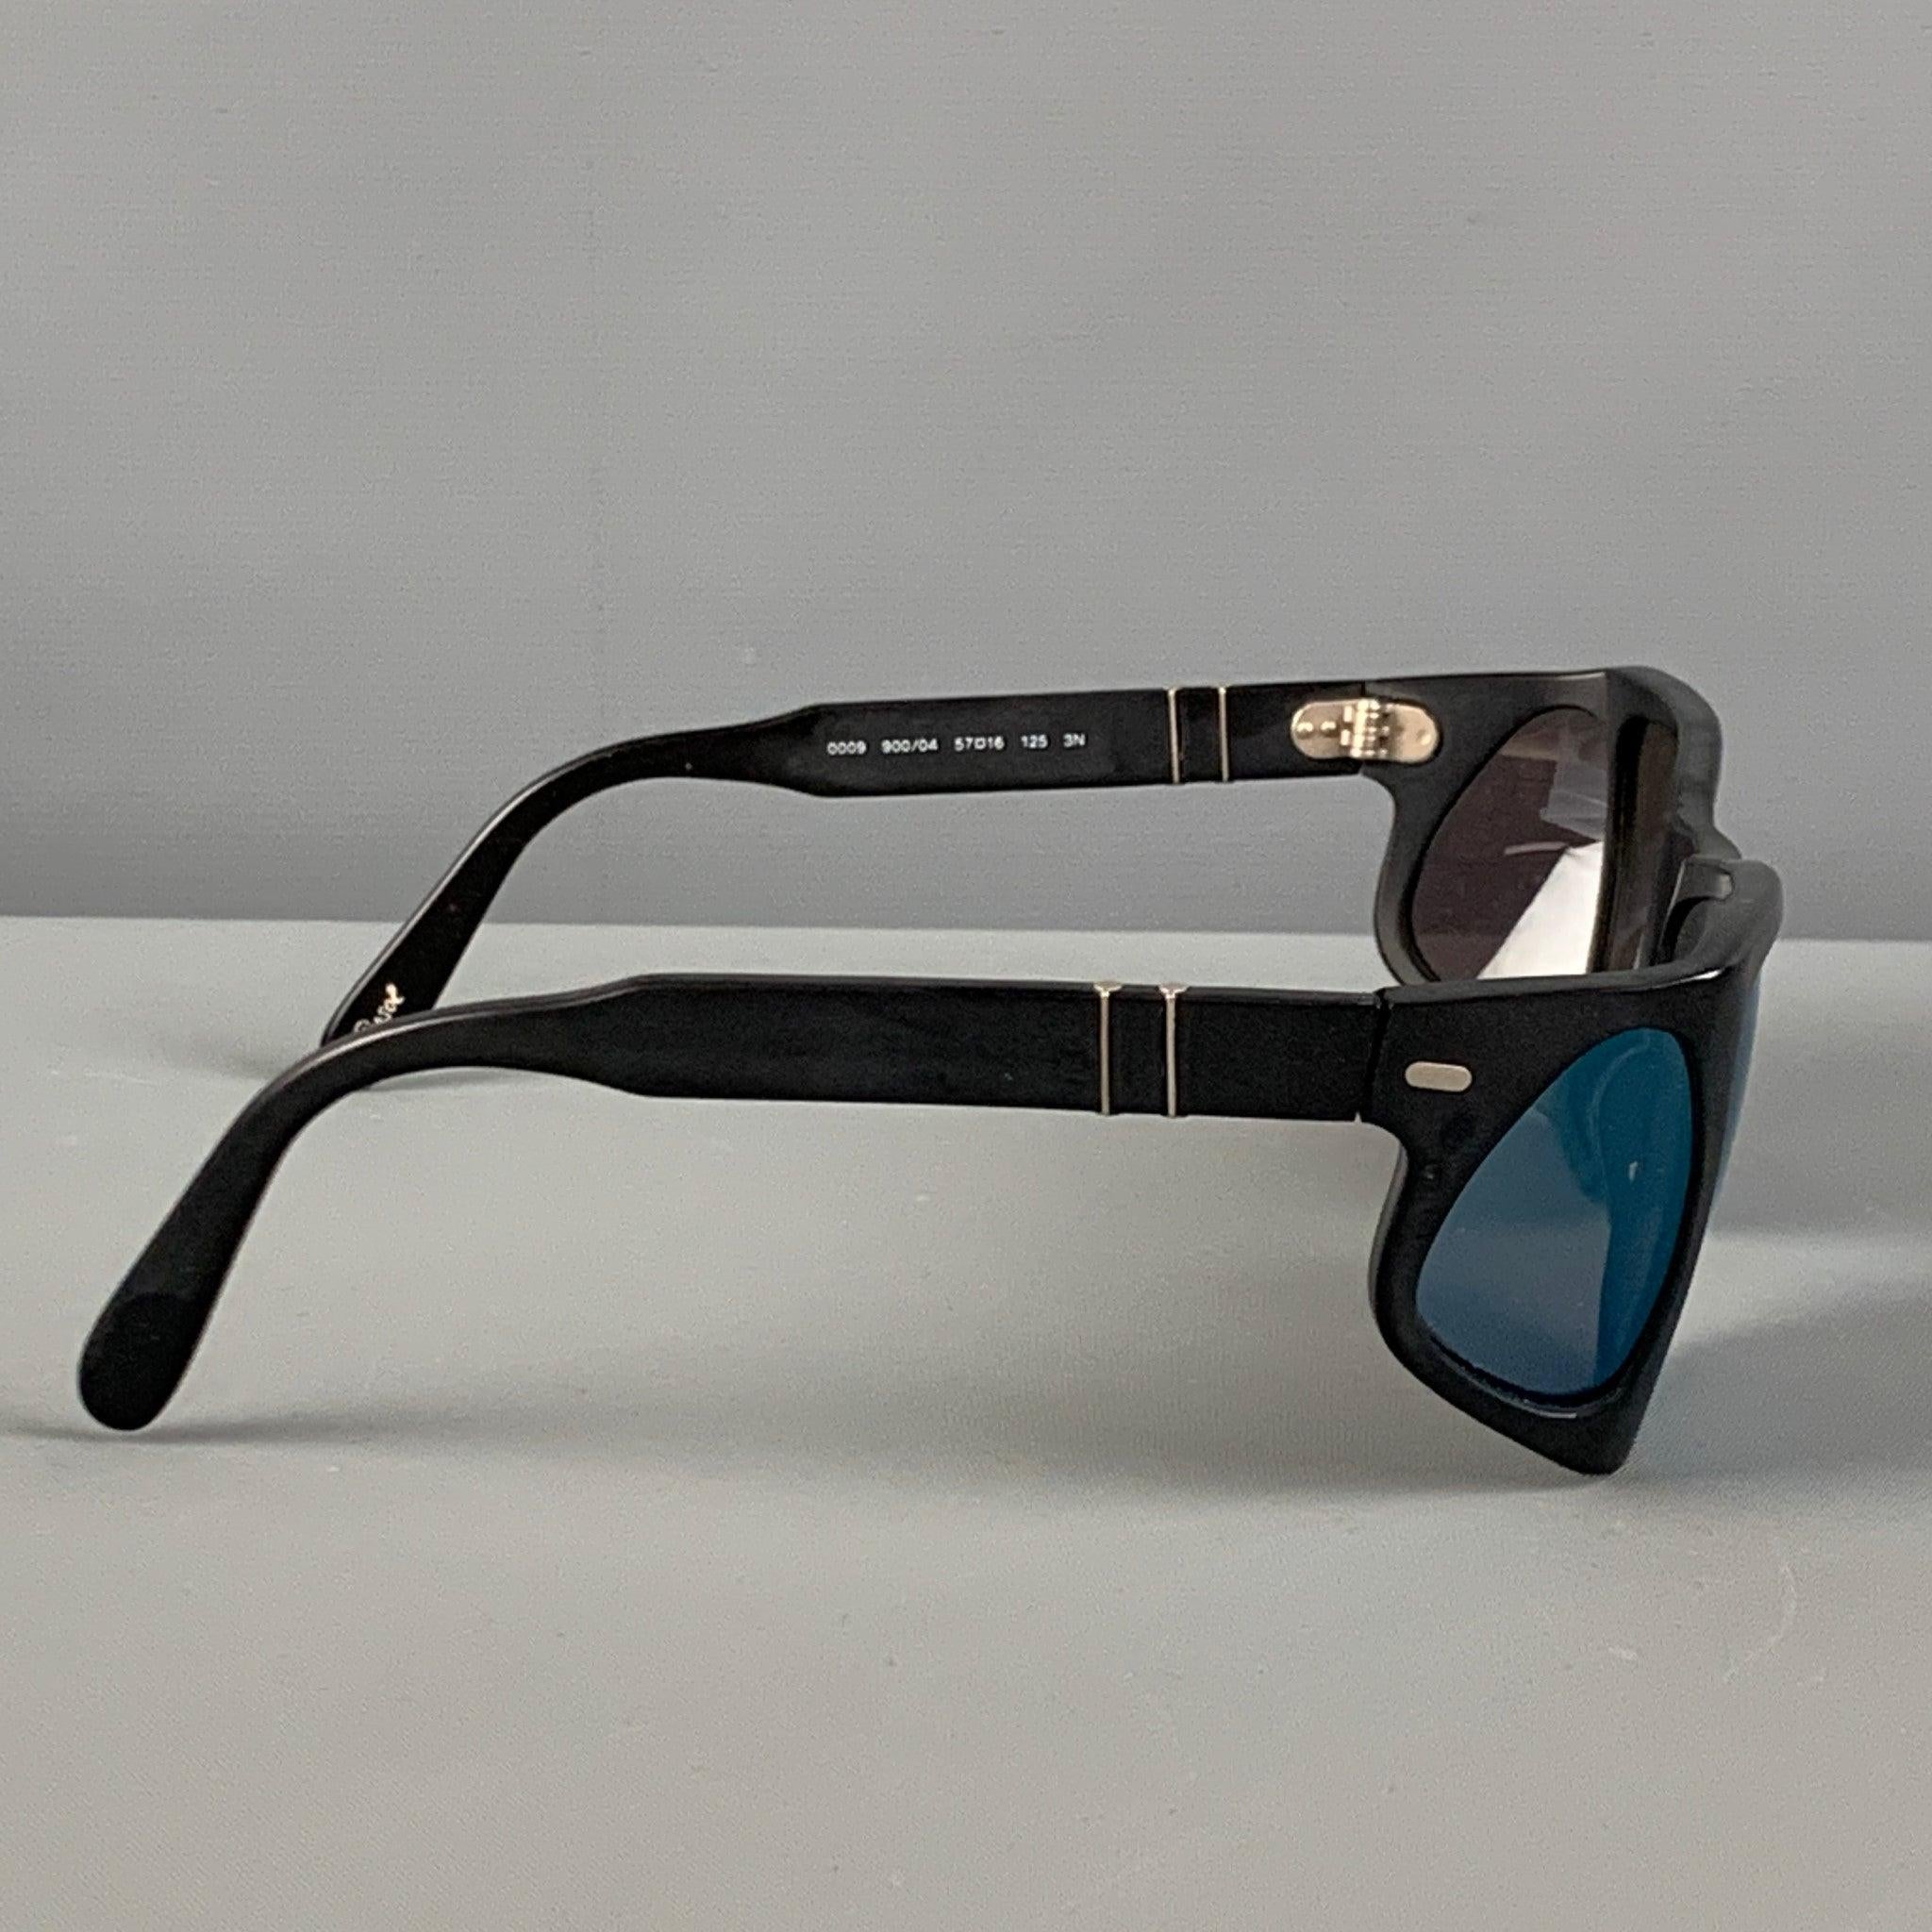 PERSOL sunglasses comes in a black acetate featuring a shield design, silver tone hardware, and blue tinted lenses. Made in Italy.
Very Good
Pre-Owned Condition. 

Marked:   0009 900/04 57-16 125 3N 

Measurements: 
  Length: 11.5 cm. Height: 5 cm.
